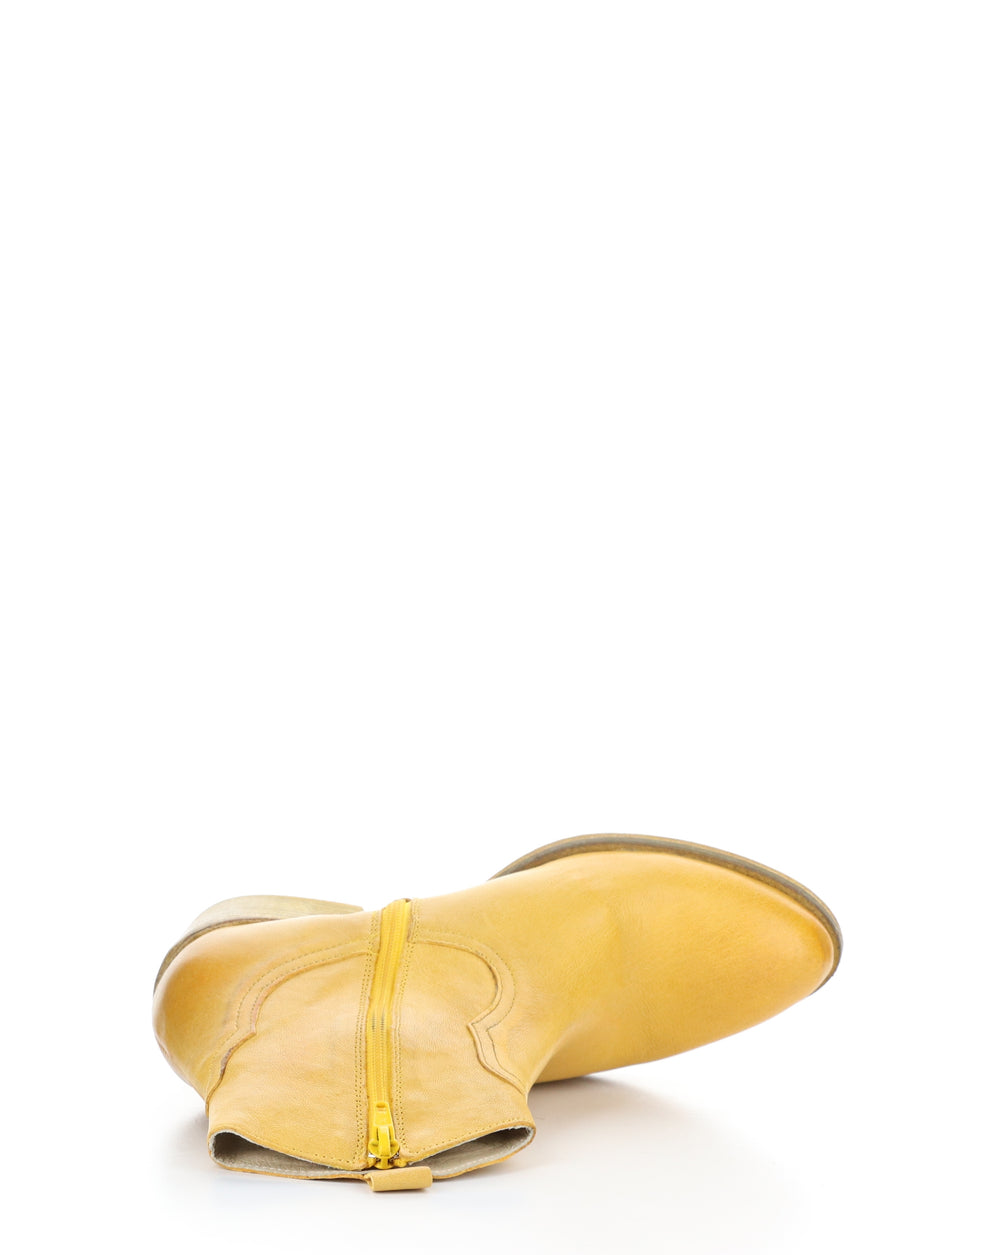 WAMI092FLY 002 YELLOW Round Toe Boots